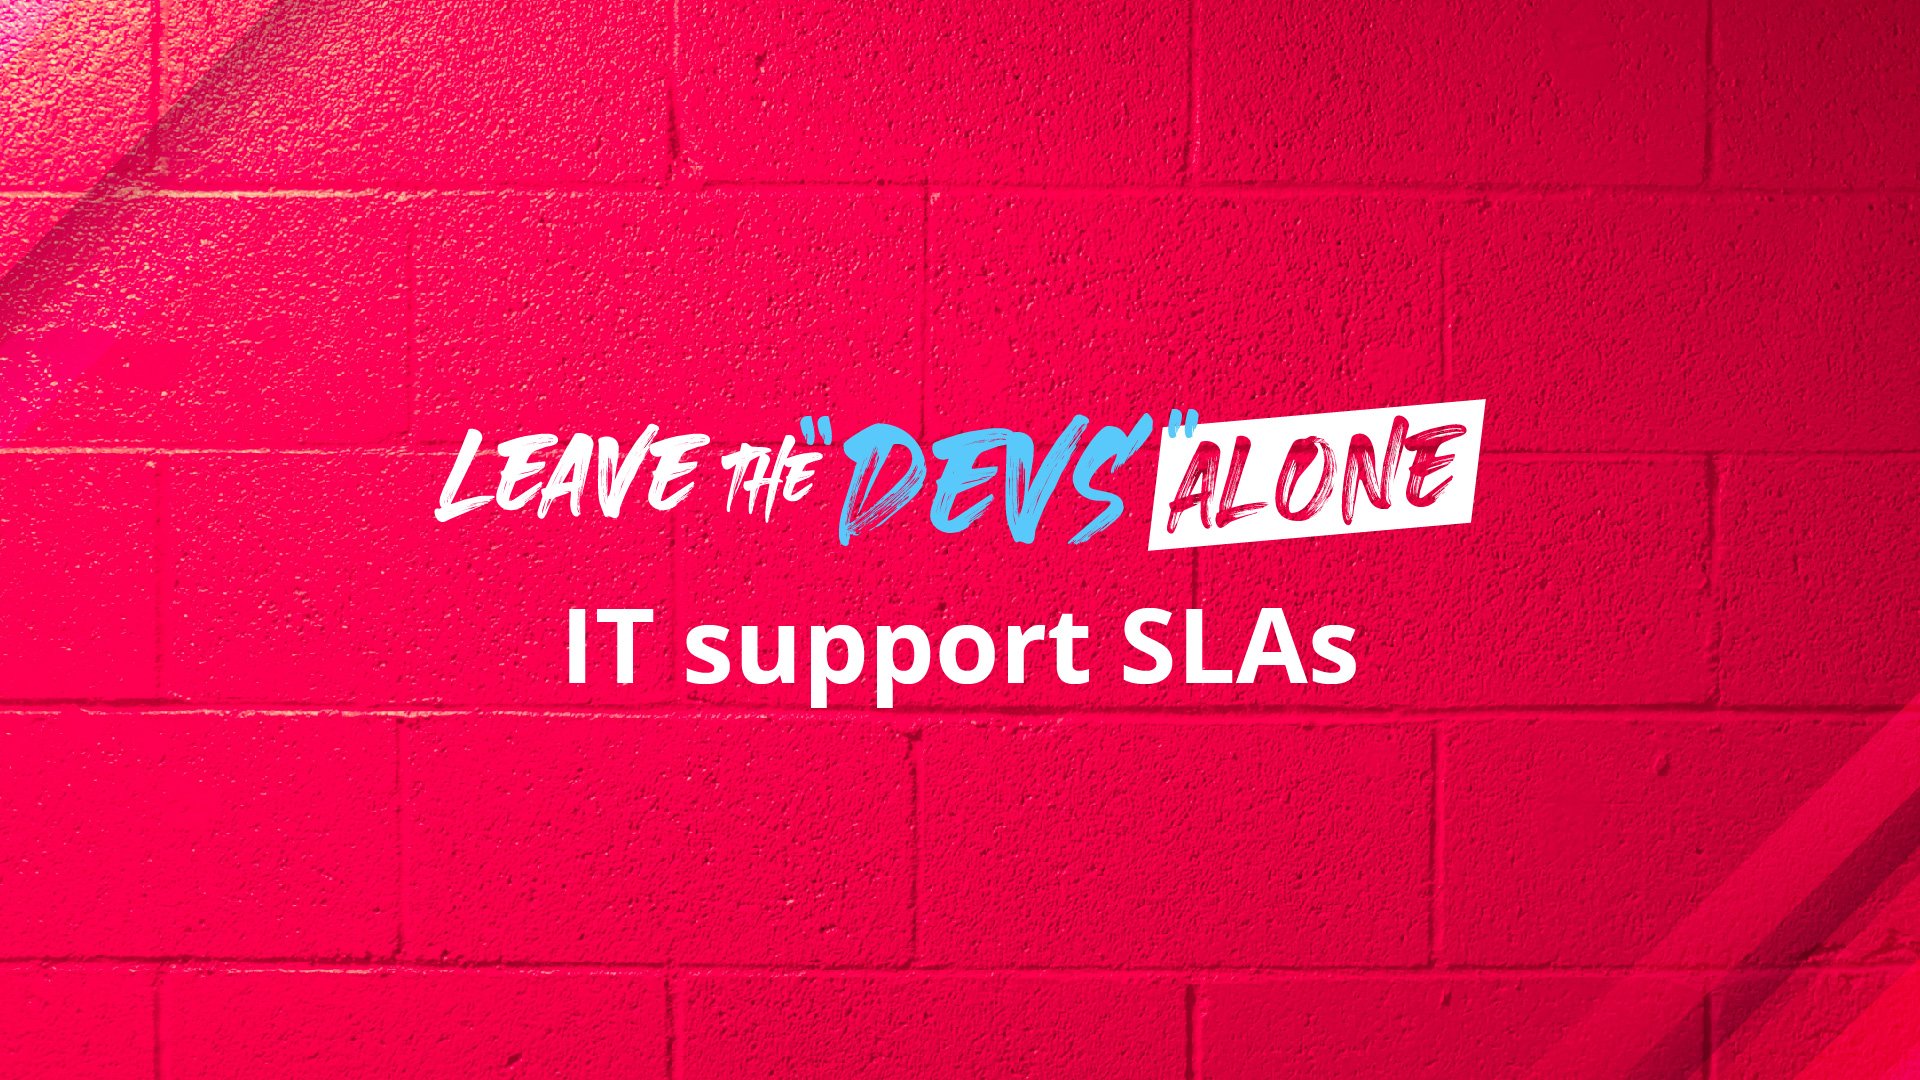 IT support SLAs: how to establish, measure, and achieve them?